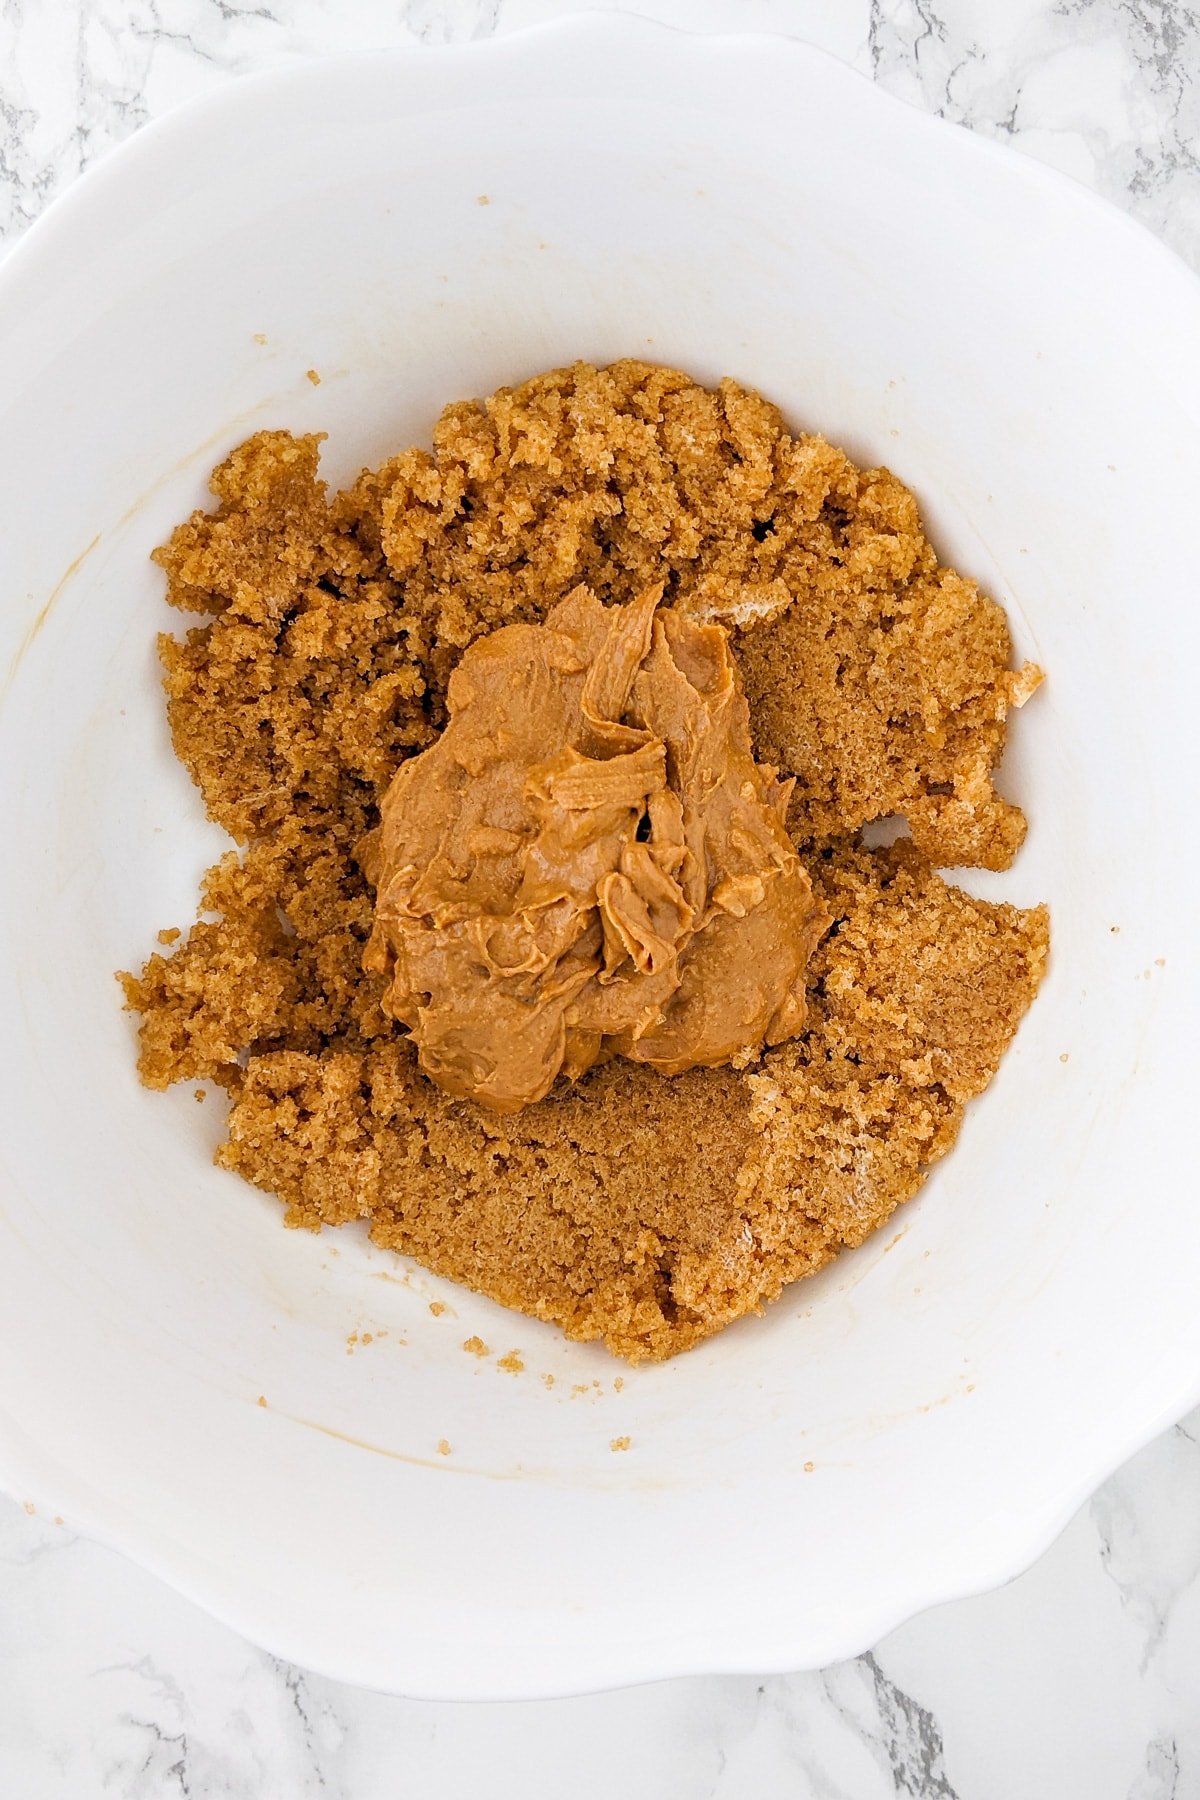 A mix of brown sugar, butter and peanut butter.